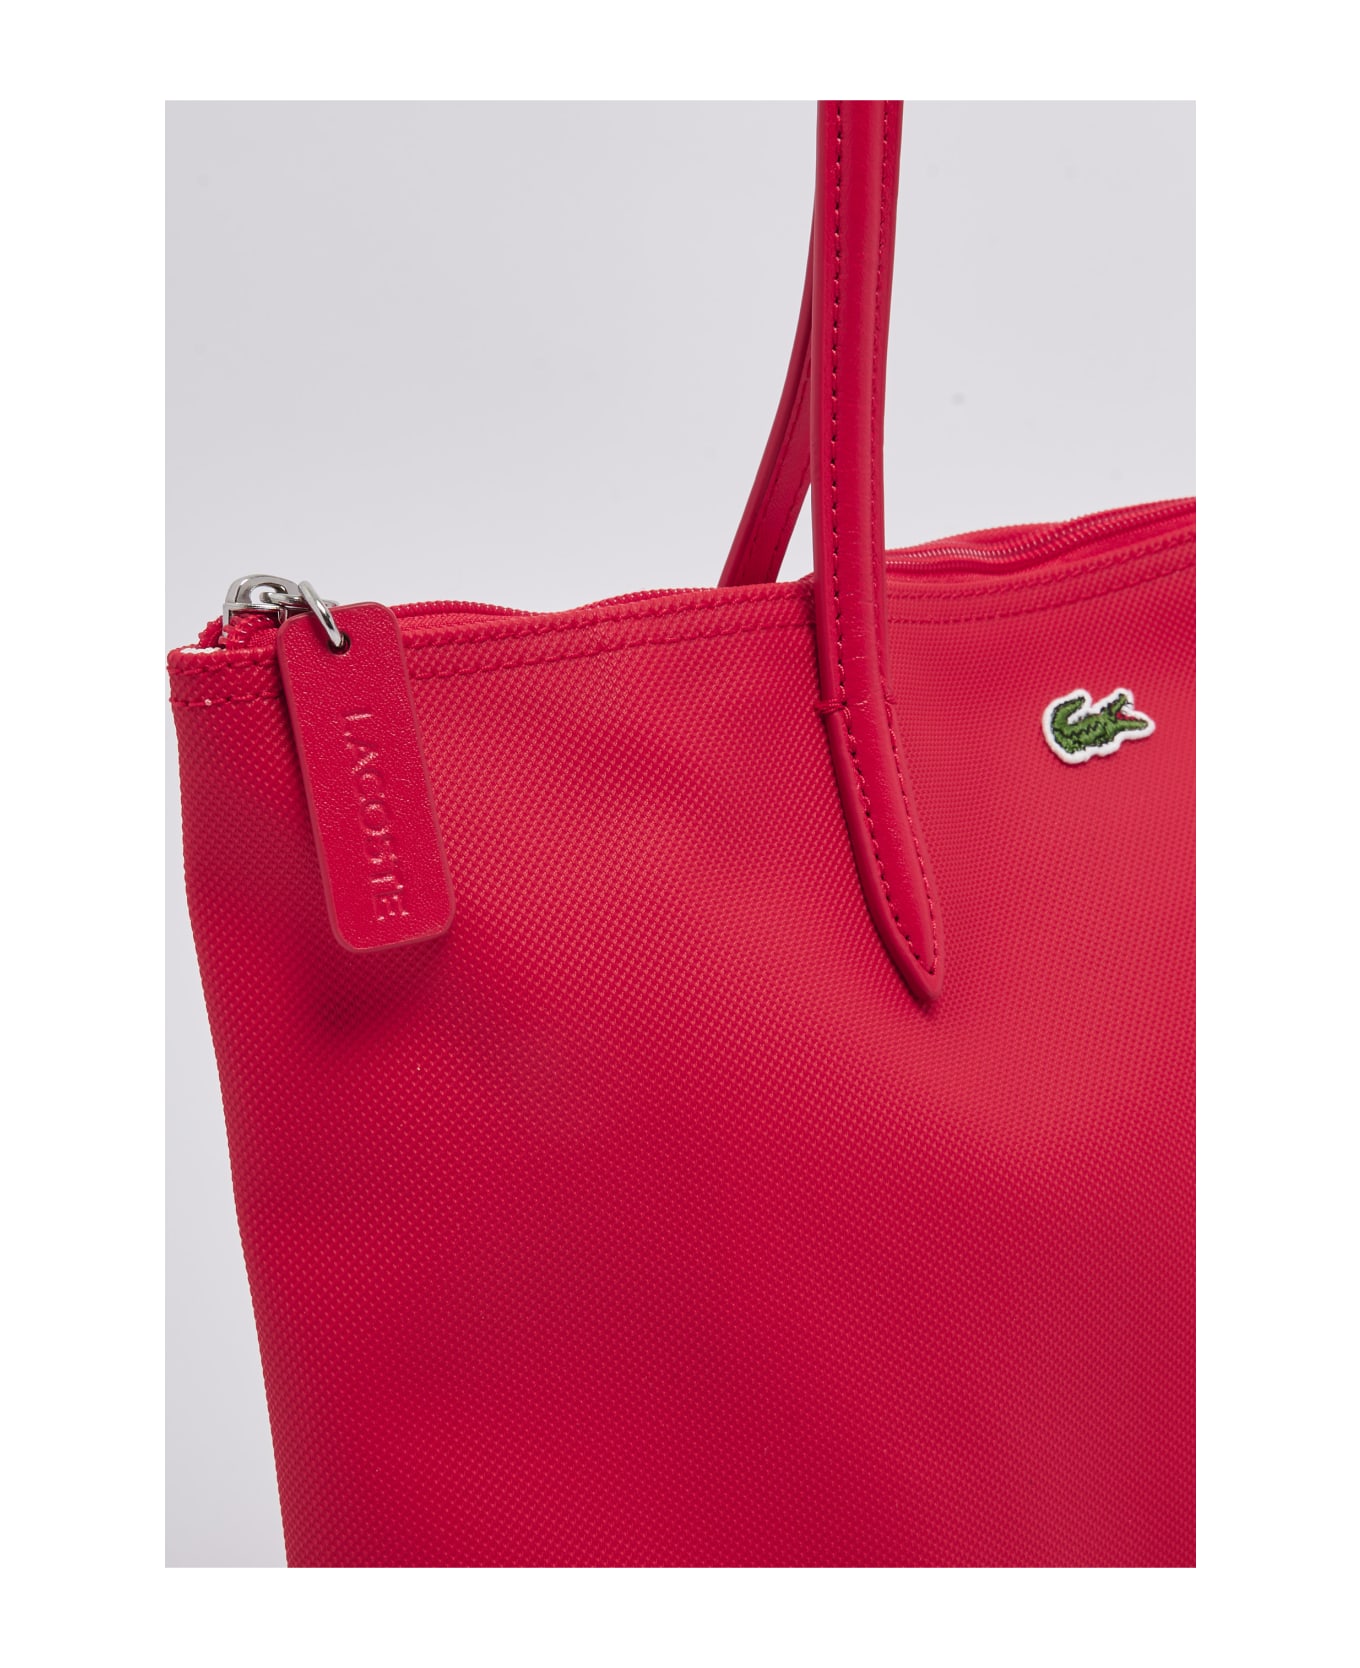 Lacoste Pvc Shopping Bag - ROSSO トートバッグ